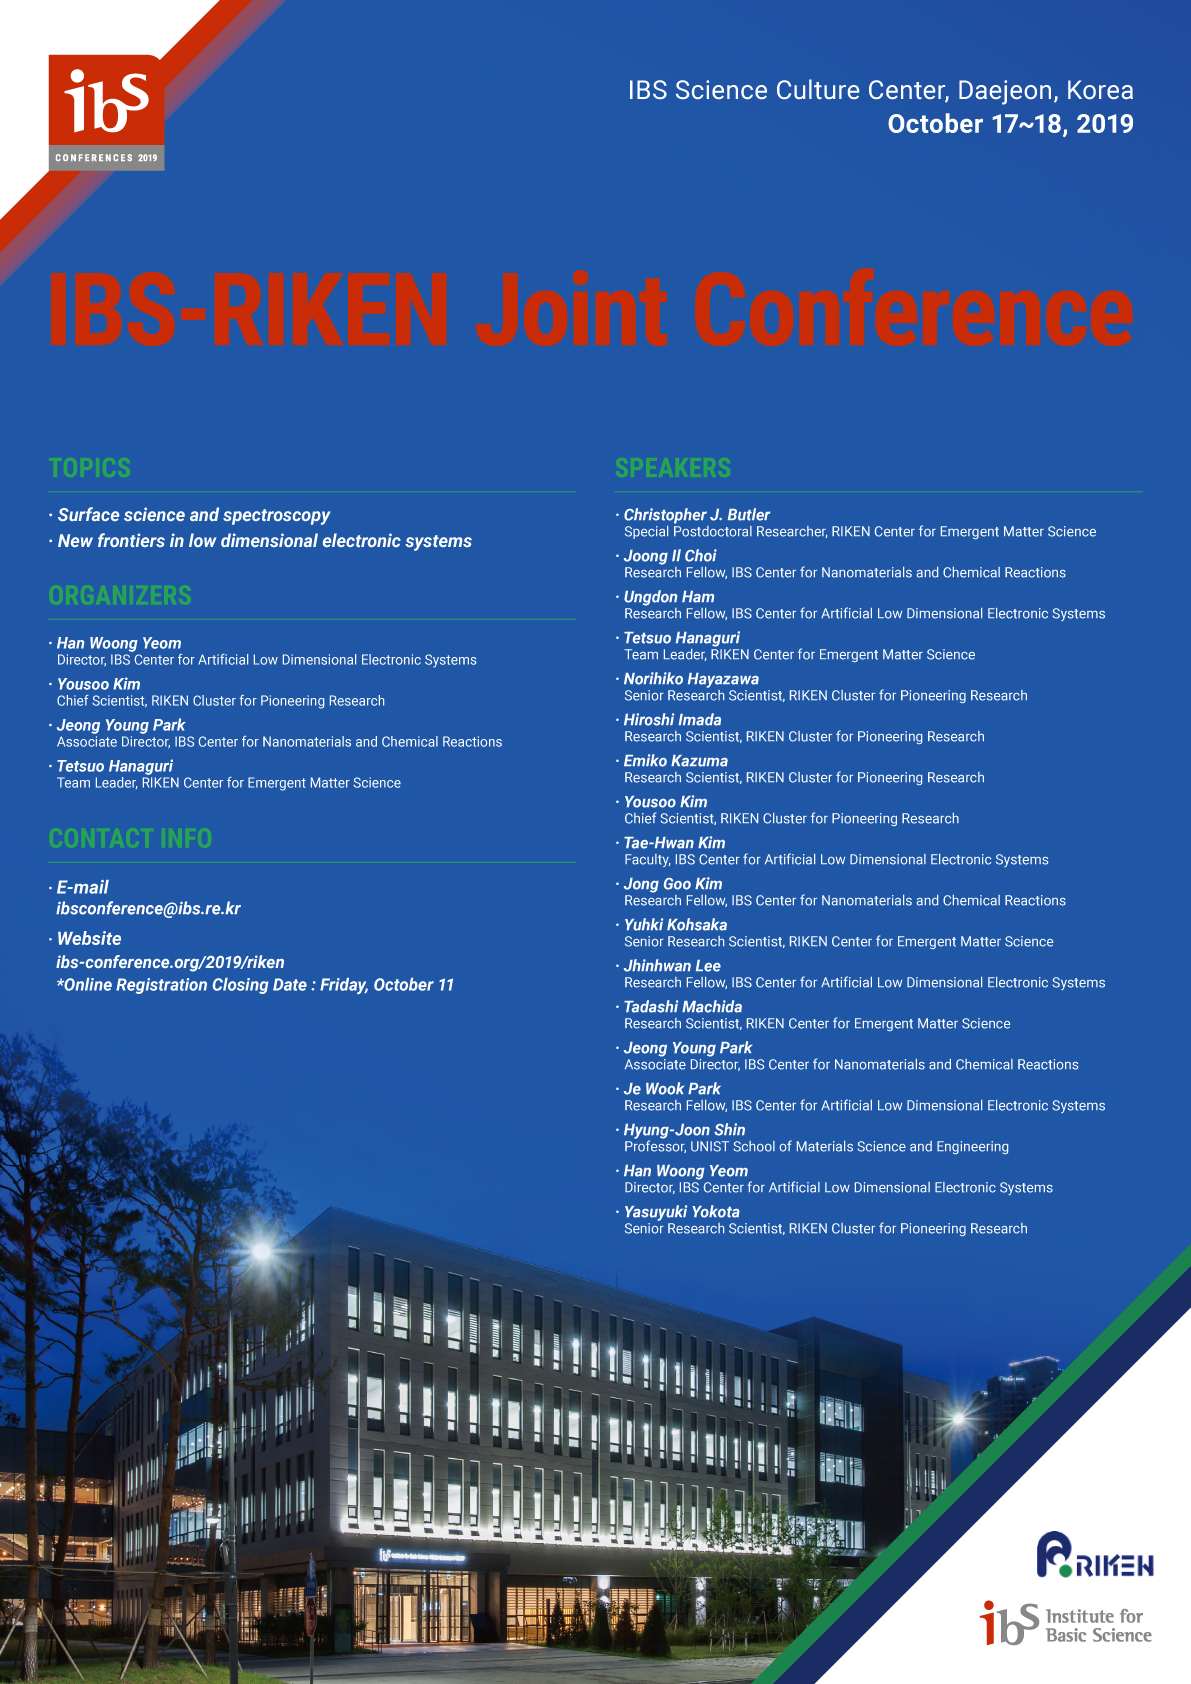 IBS-RIKEN Joint Conference(Oct 17-18, IBS Science Culture Center)